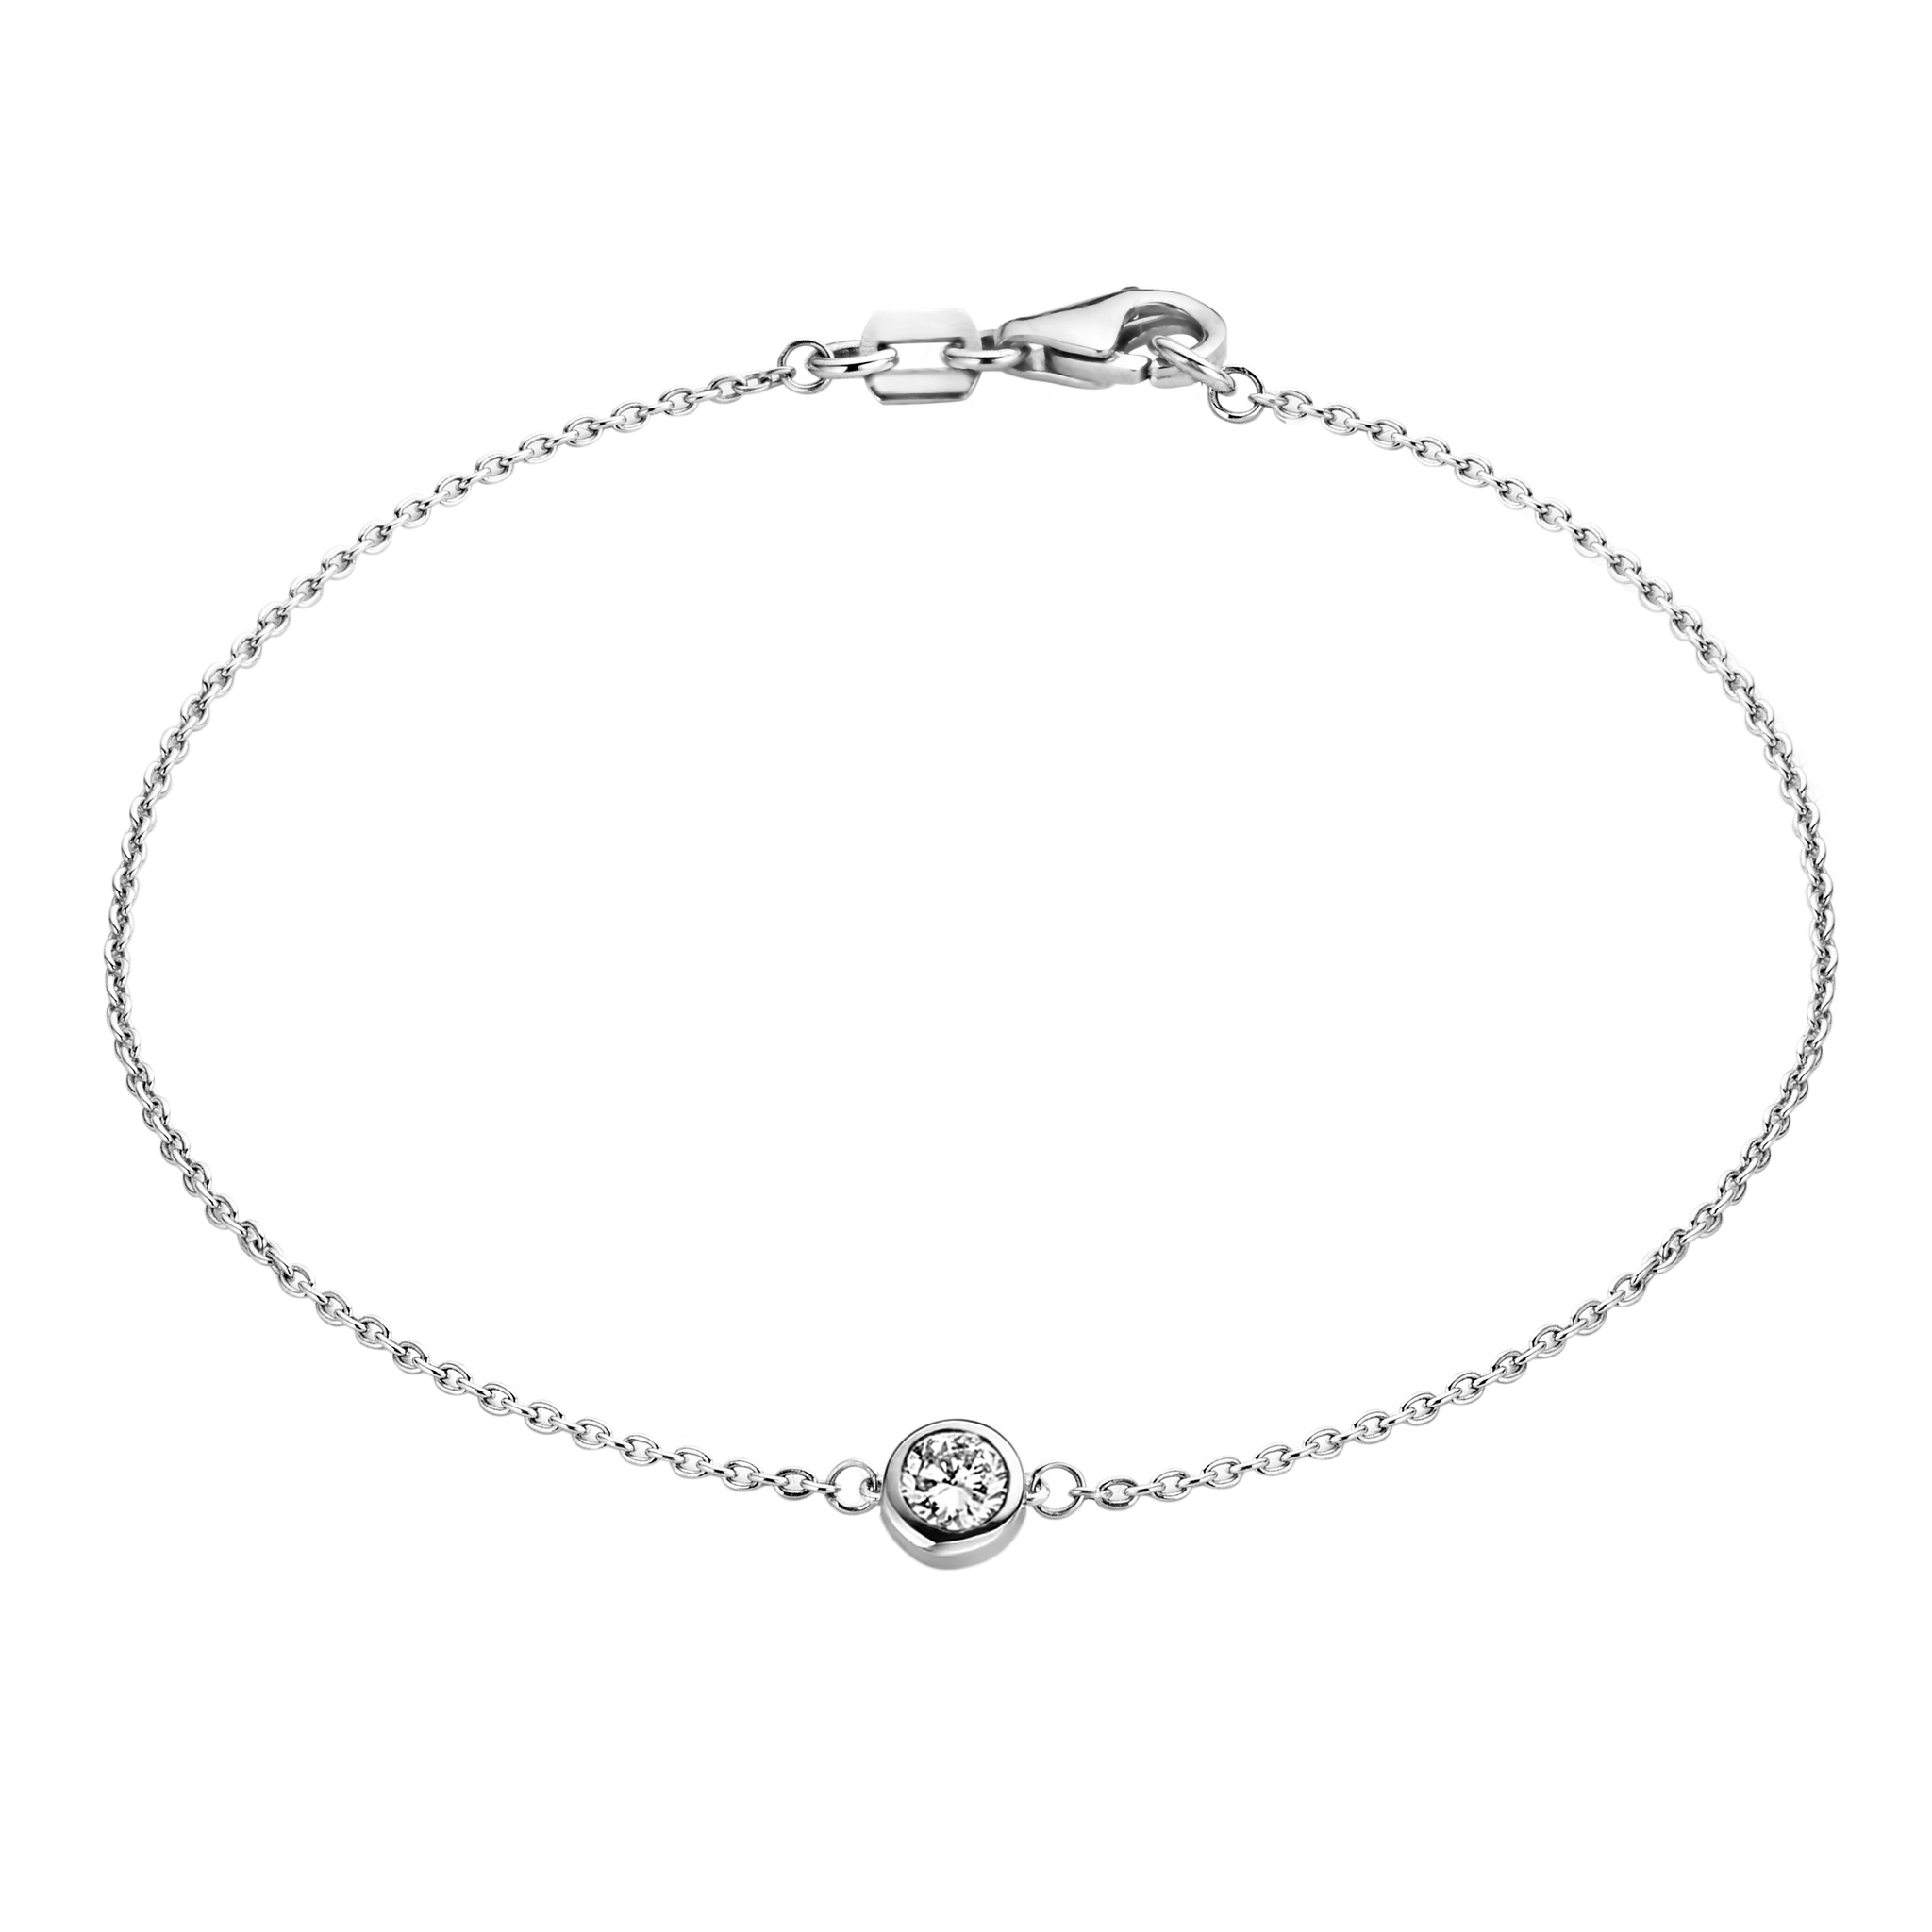 A solitaire 0.1 carat round brilliant is bezel set in 18k recycled gold. This bracelet can be adjusted to two different lengths, 6.3" (16 cm) and 6.7" (17 cm). Reach out to our team for further customization options. Shown here in White Gold.